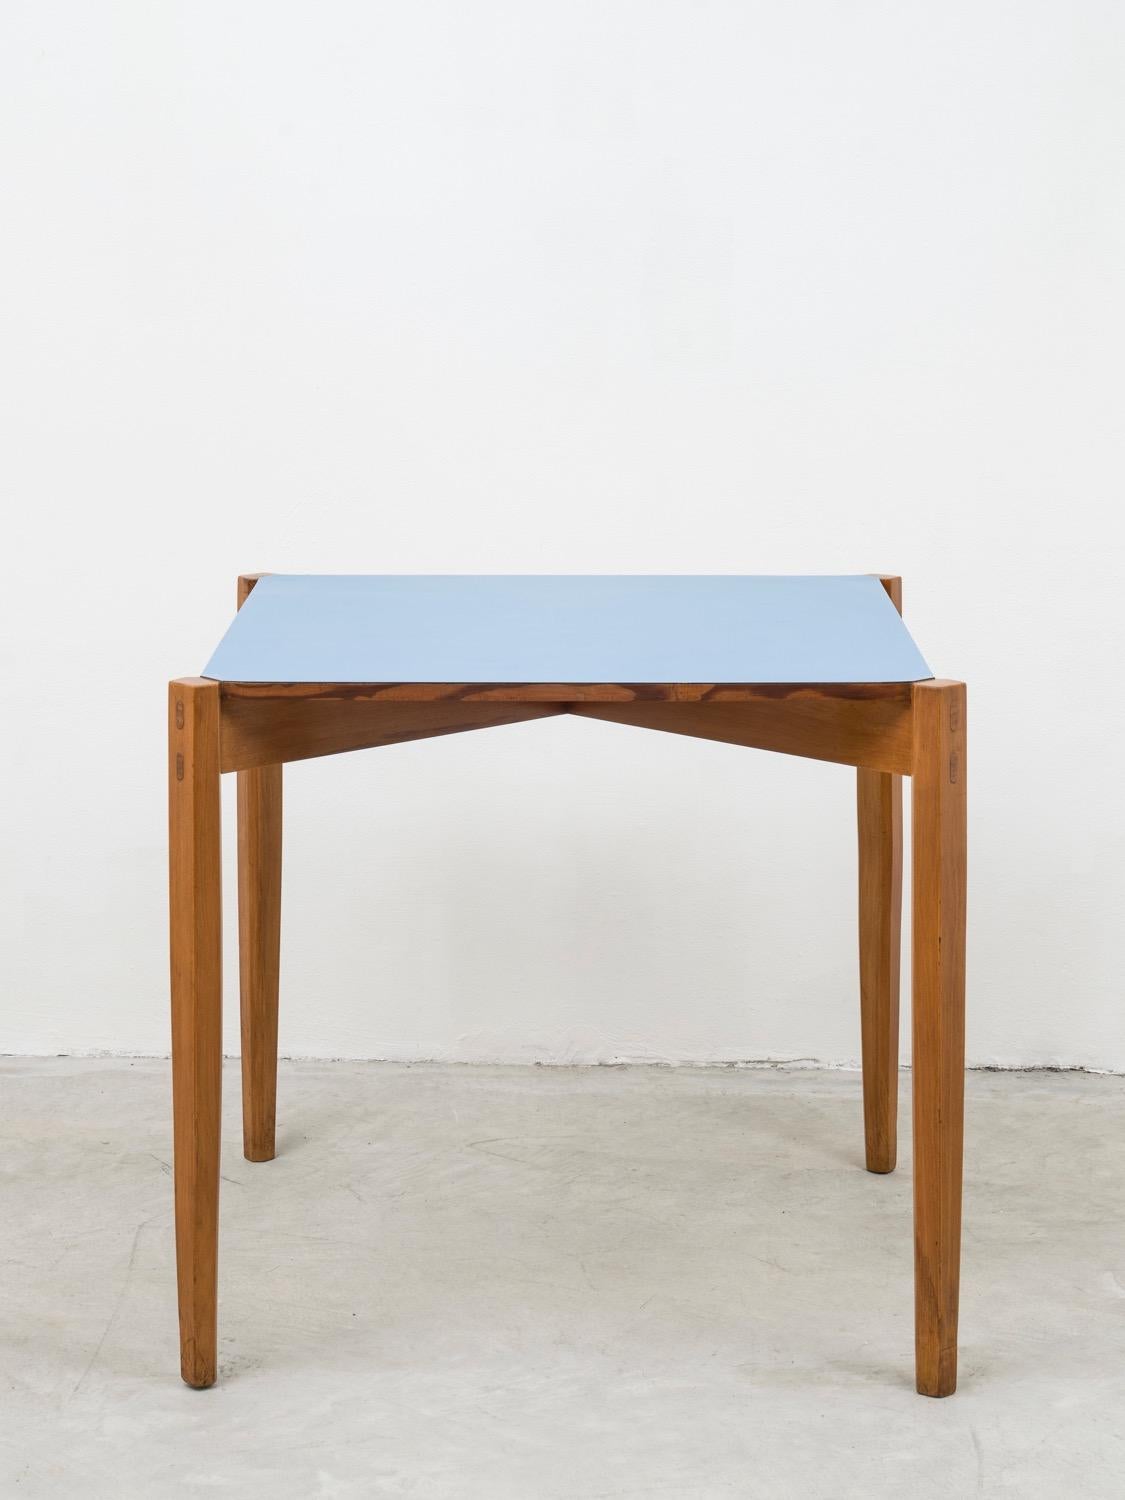 This outstanding square table, that could be used both as a gaming or dining table, is a unique piece, signed under the top, by artist and designer Giulio Alchini. The use of such a light blue formica together with wood resembles also several